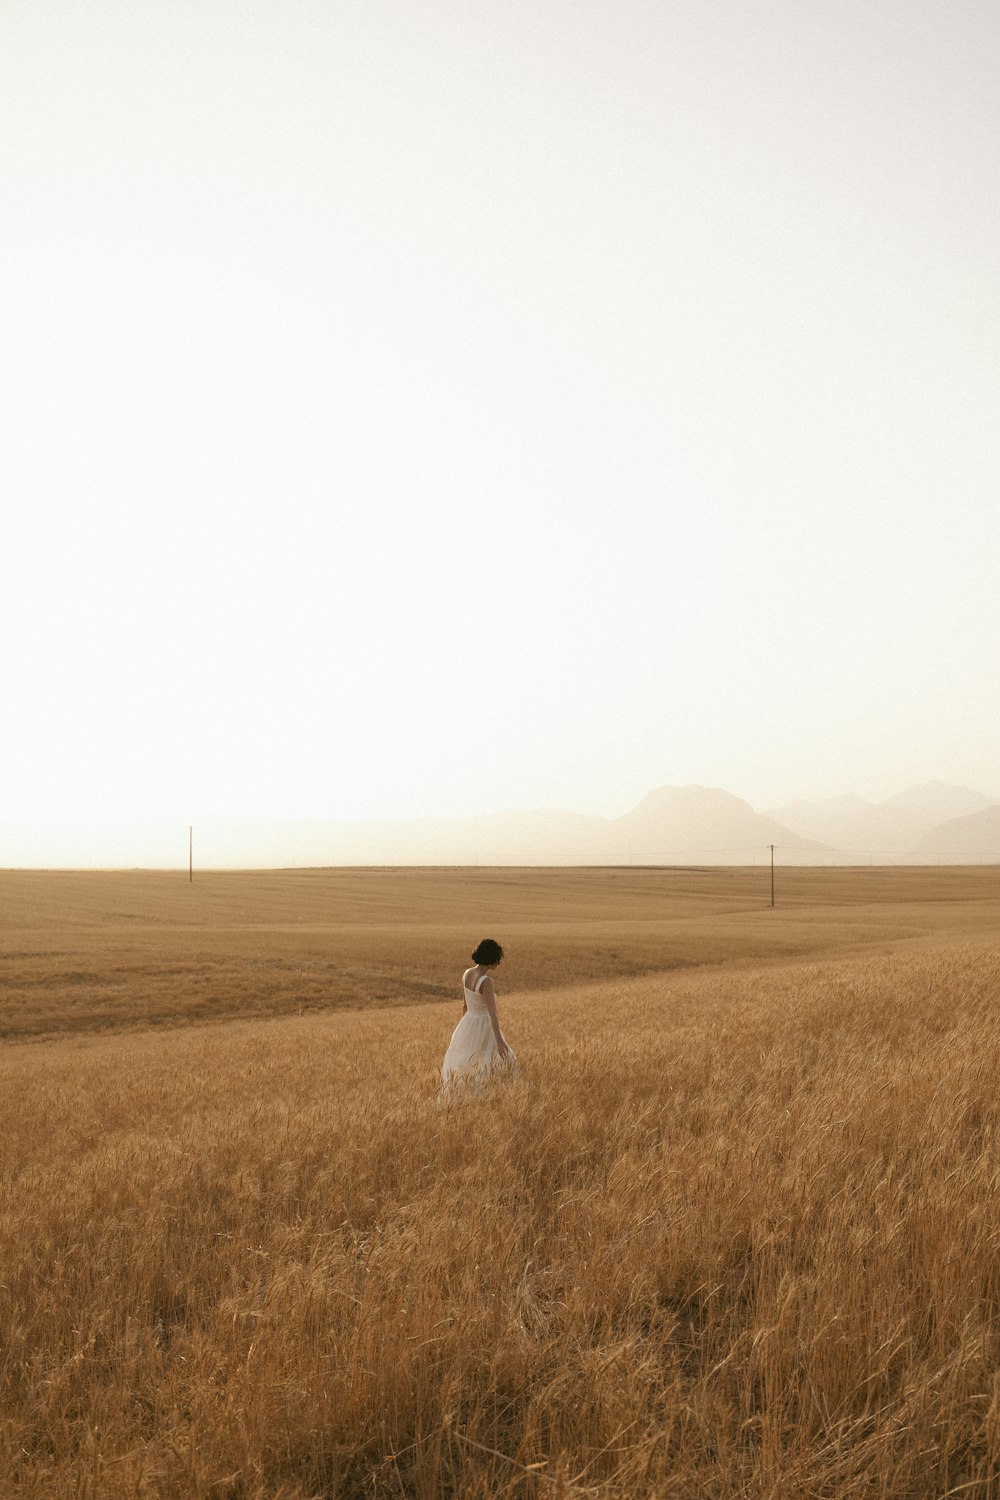 a person in a white dress standing in a field of tall grass